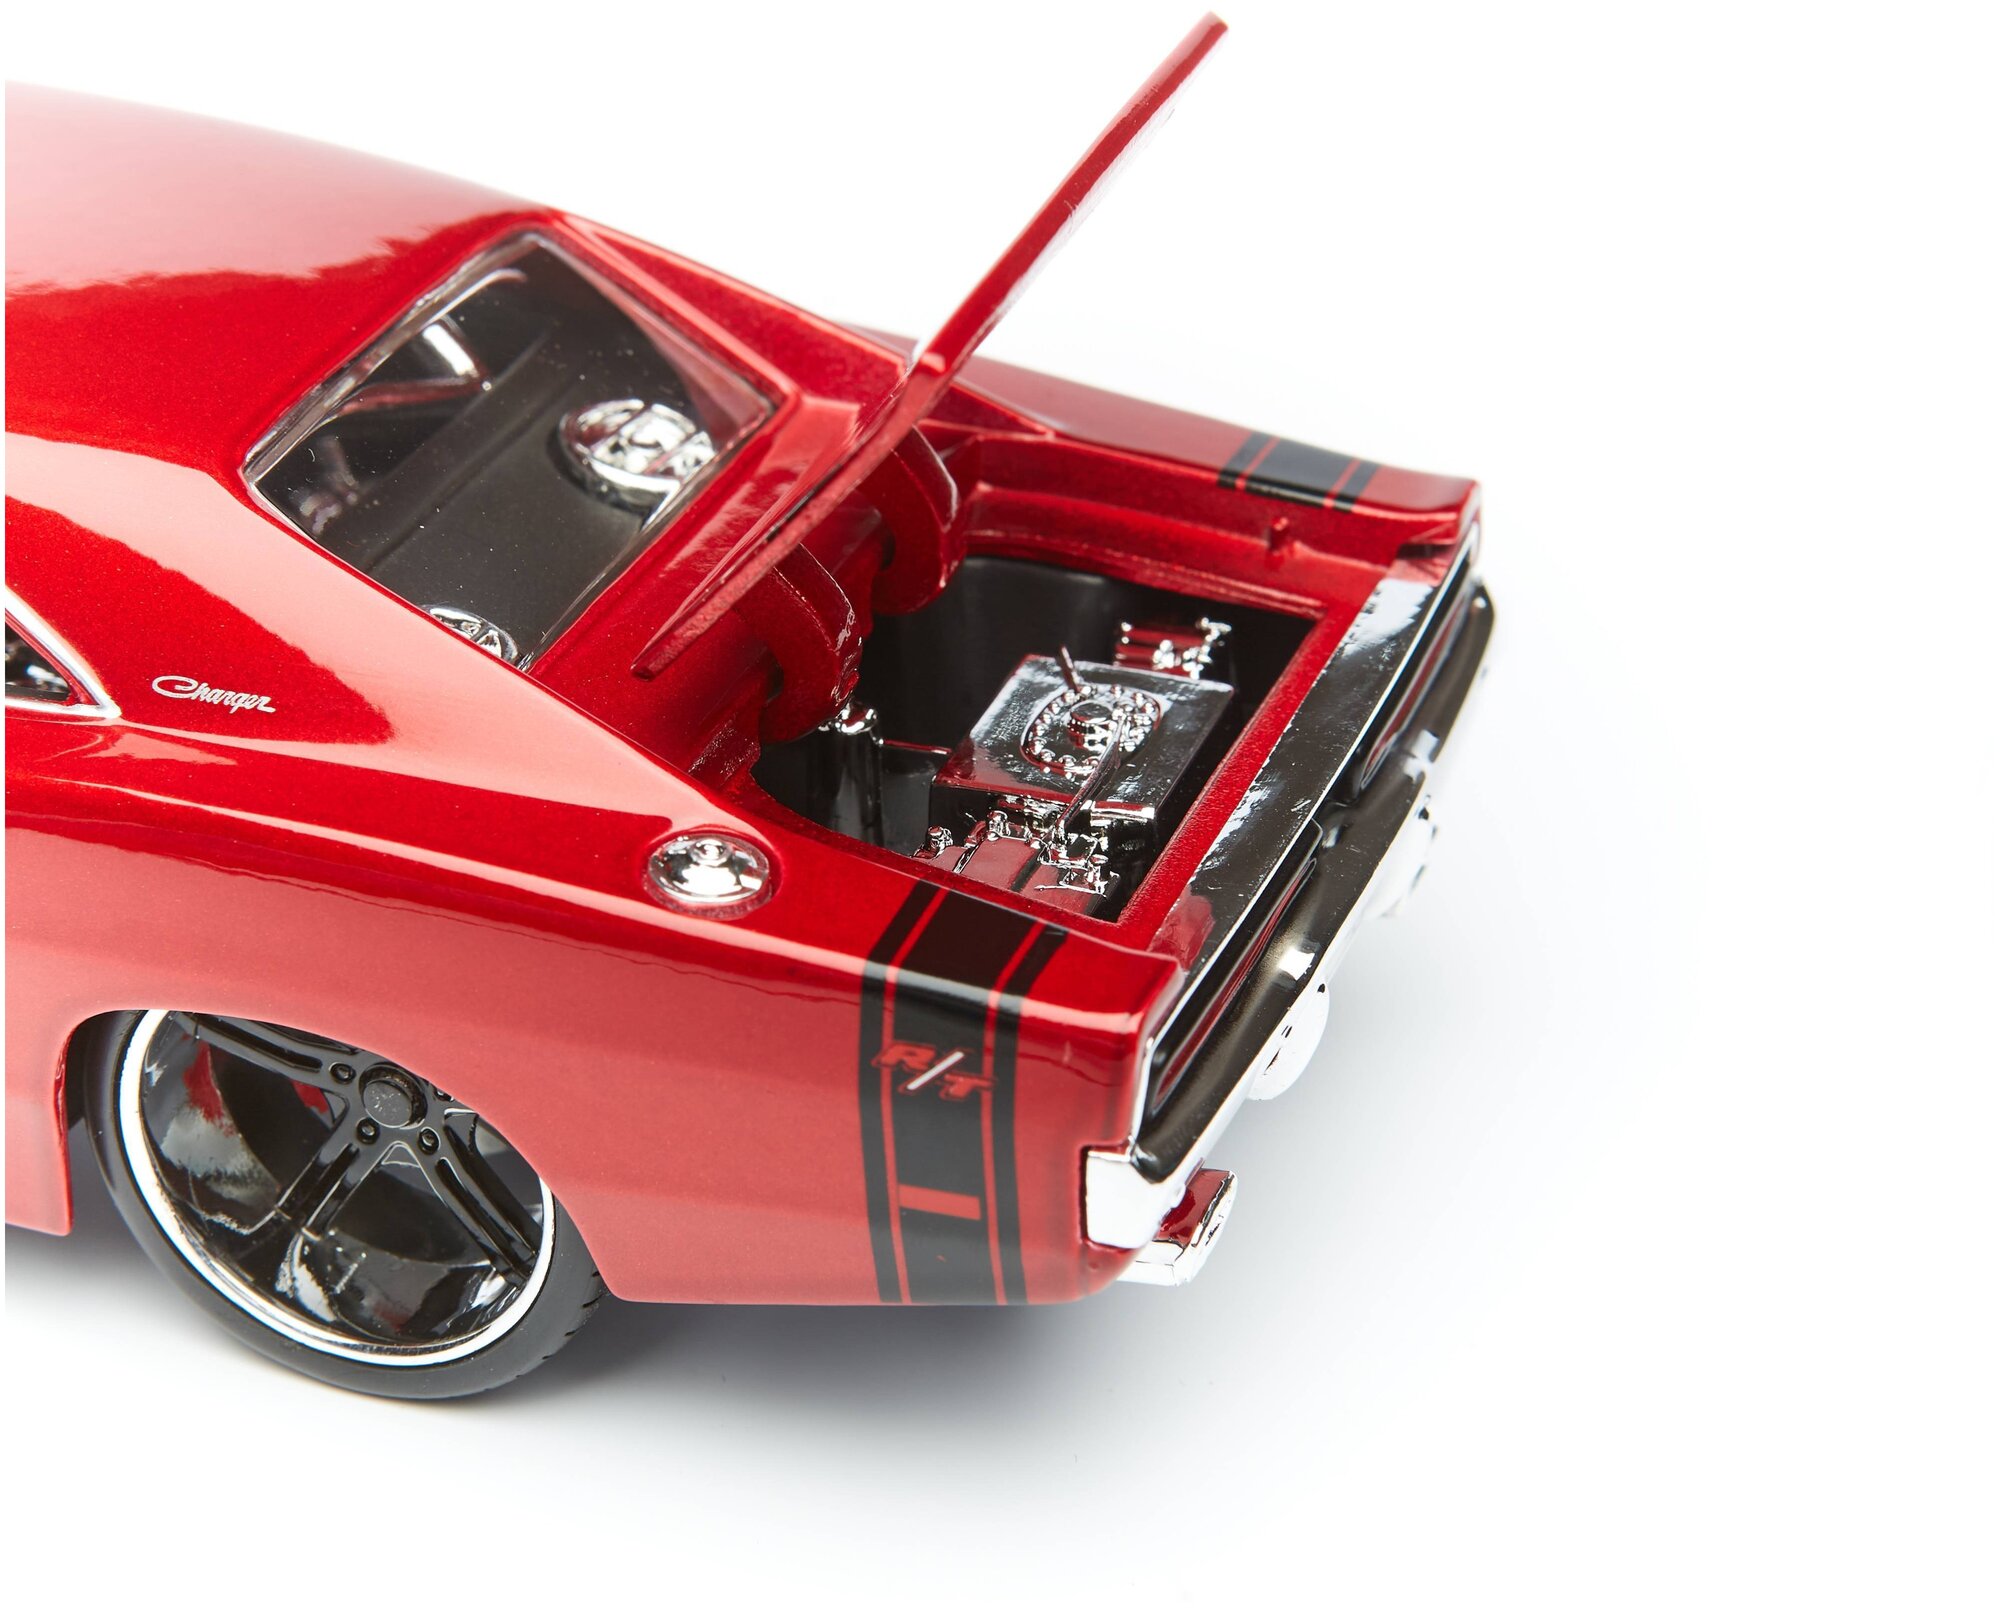 Maisto Машинка 1:24 "Design Classic Muscle - 1969 Dodge Charger R/T", красная - фото №7